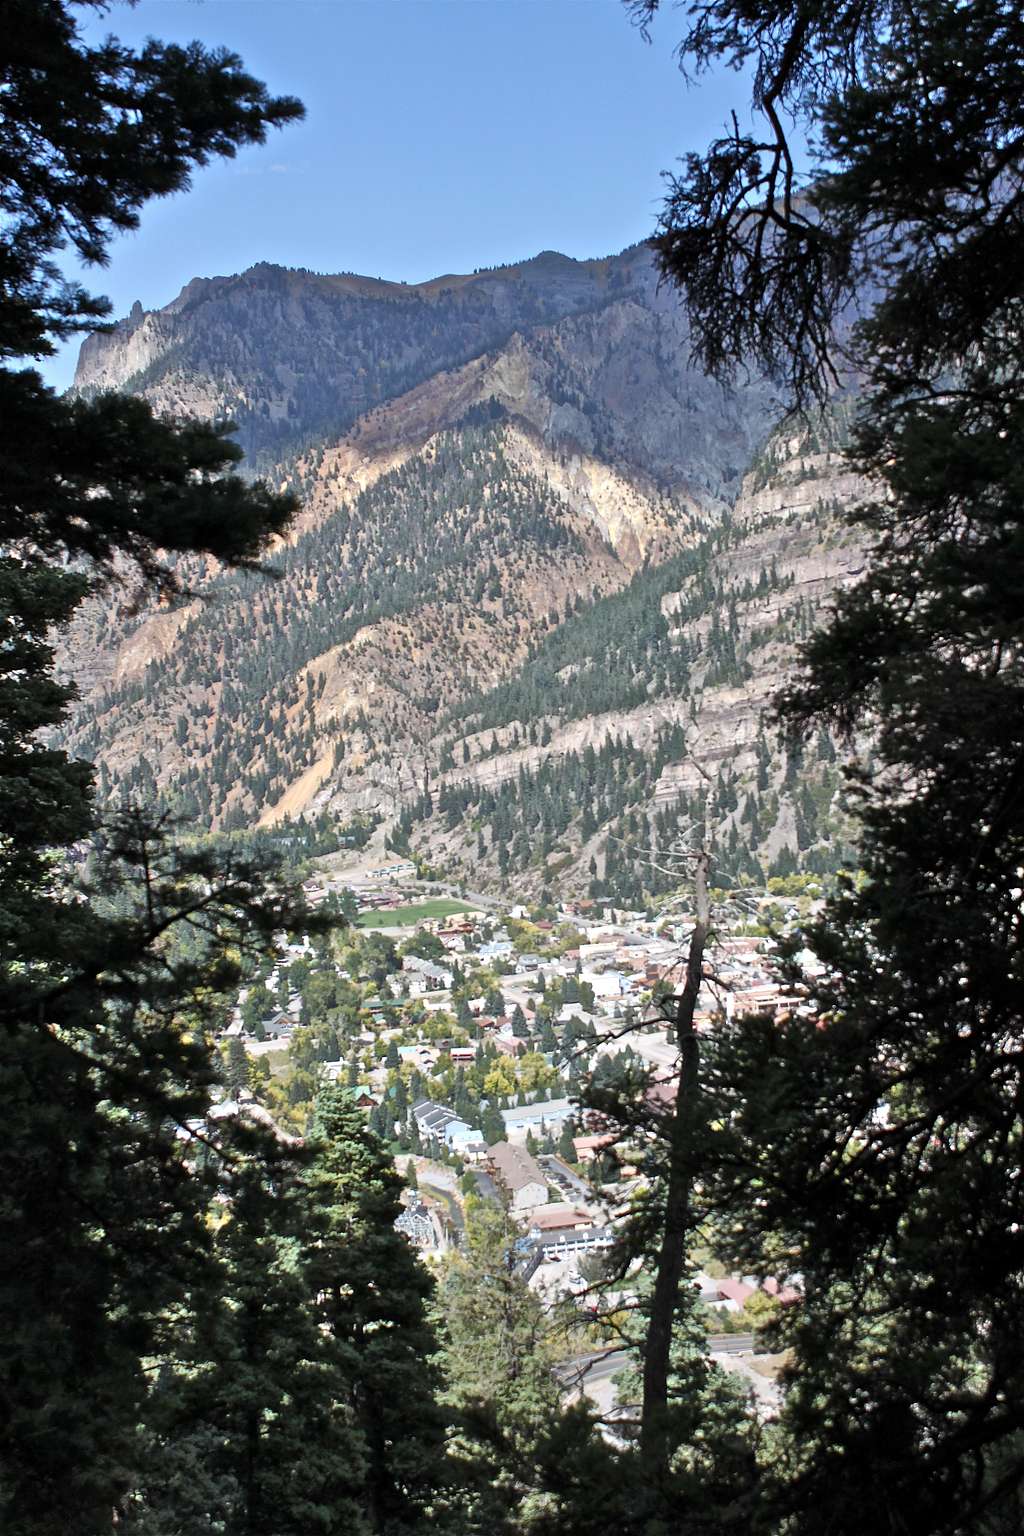 View of town Ouray